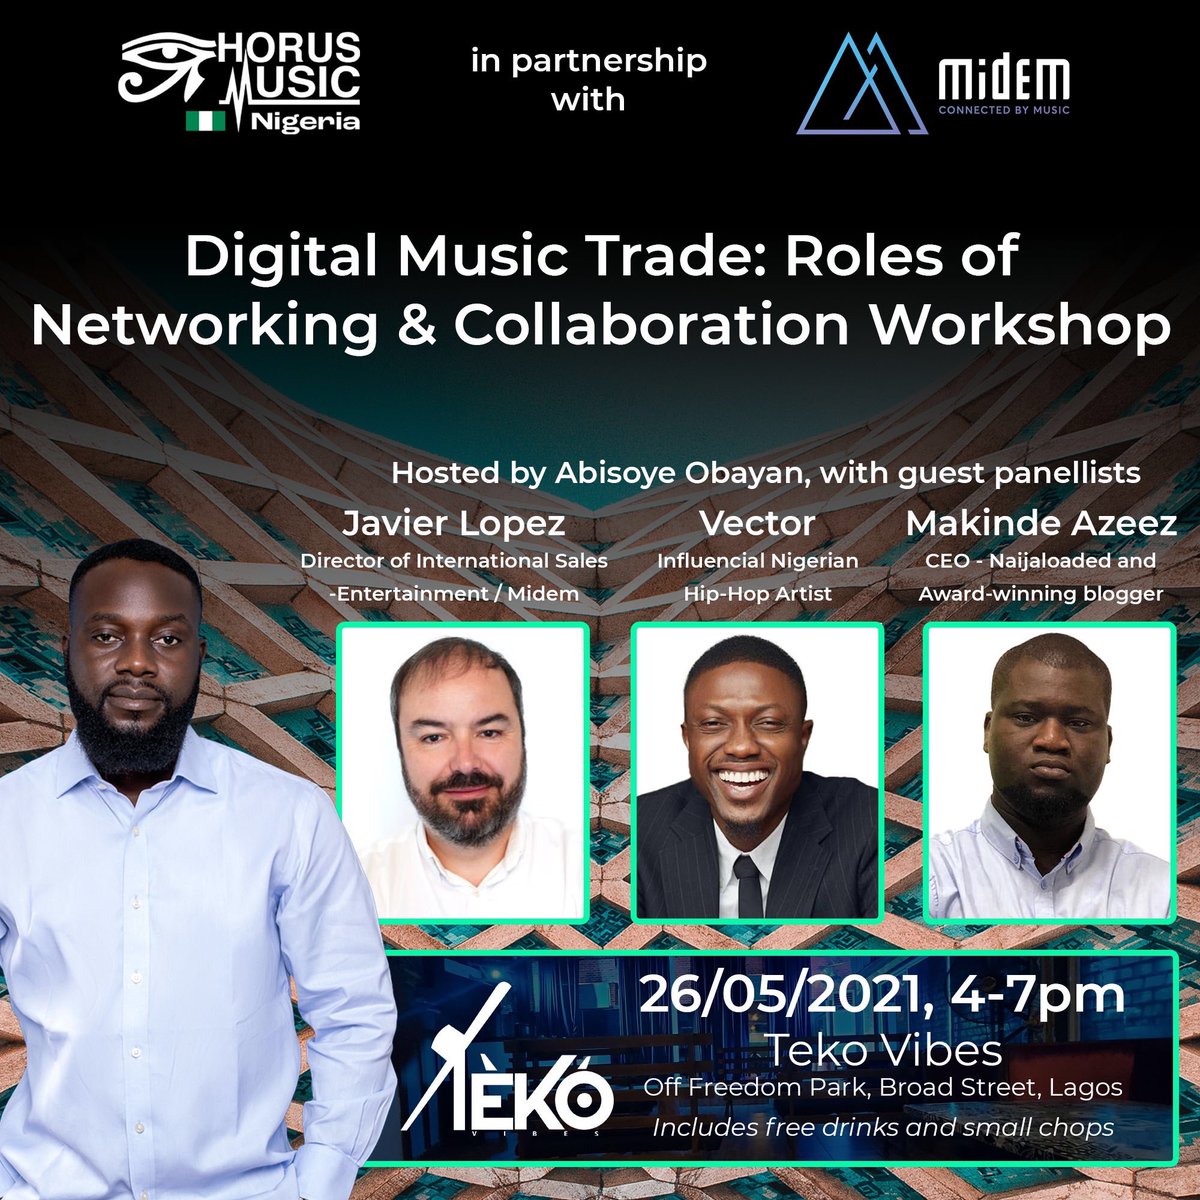 Today, 4PM to 7PM in Lagos, we are playing an integral part in advancing our music sector with full effect. Join us @HorusNigeria @midem @VectorThaViper @Naijaloadedotng Don’t miss it, be there!